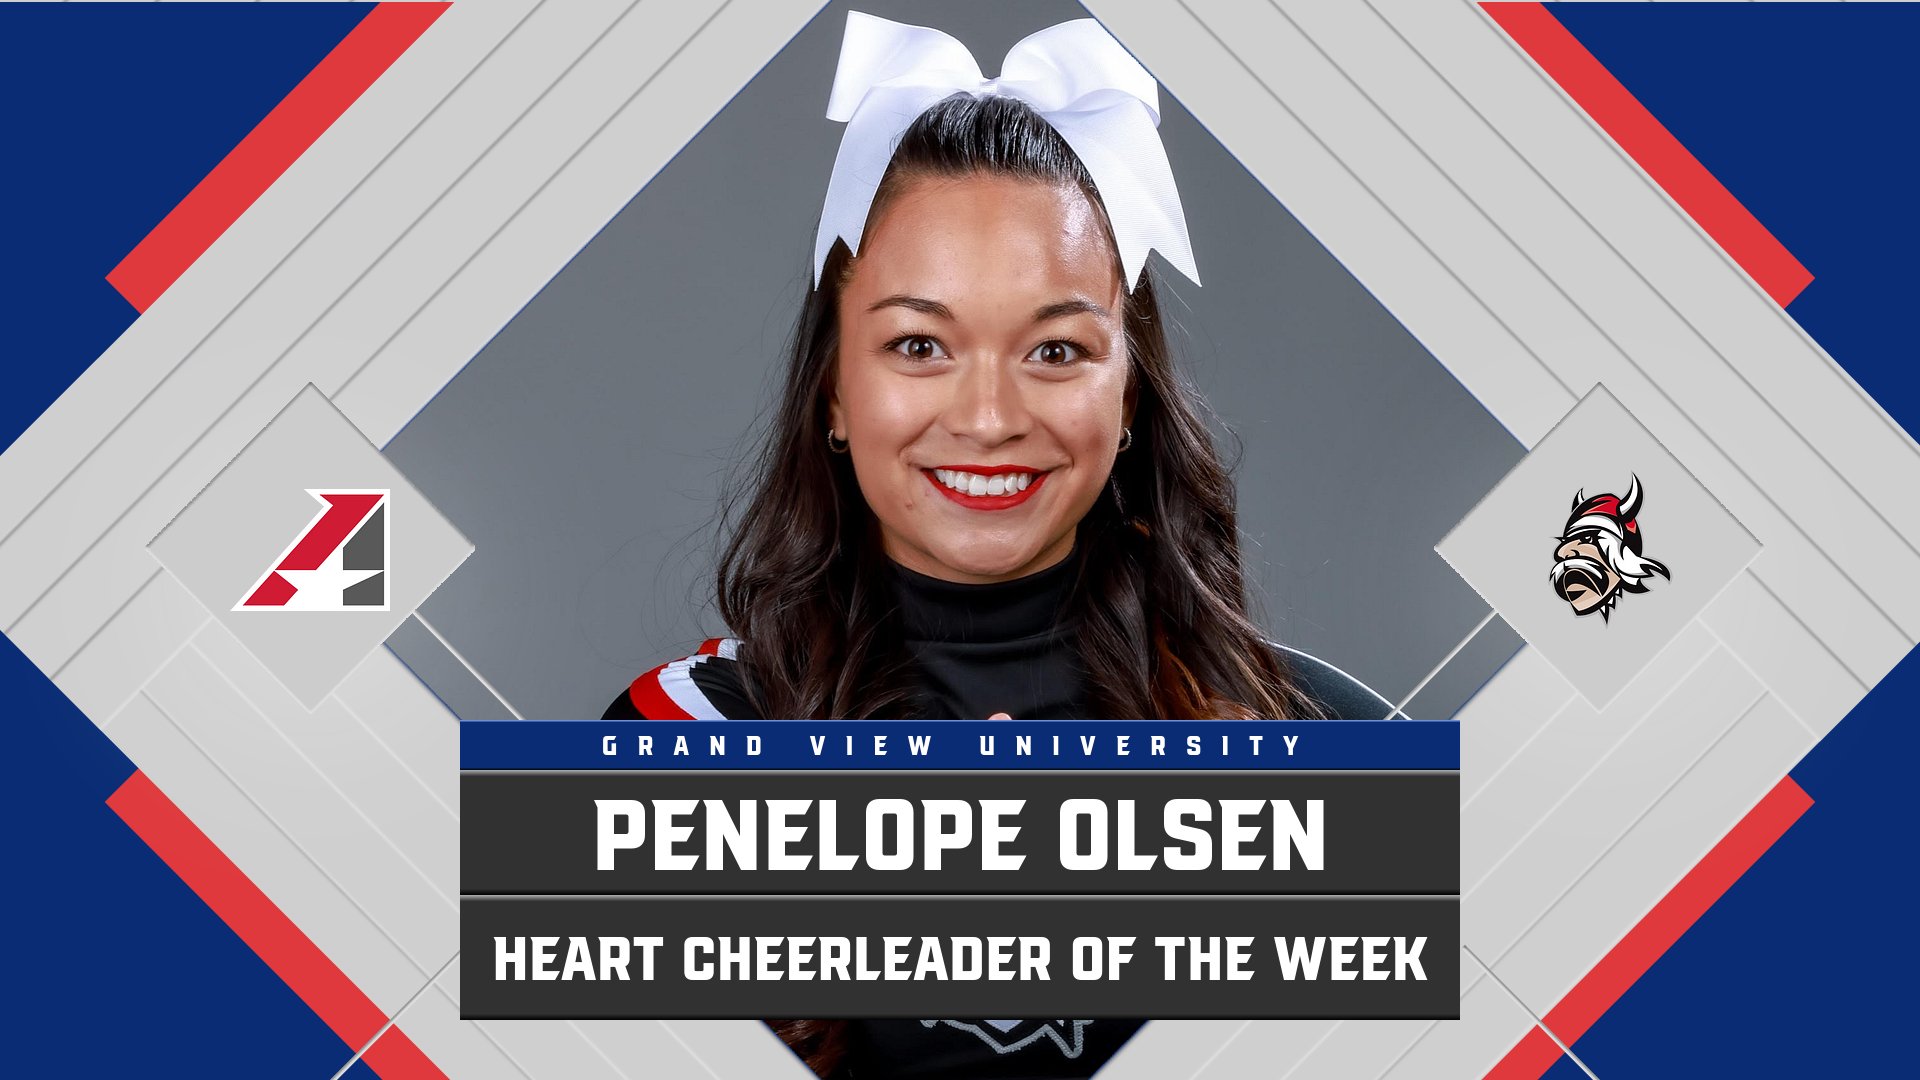 Grand View&rsquo;s Penelope Olsen Earns First-Ever Heart Cheerleader of the Week Award